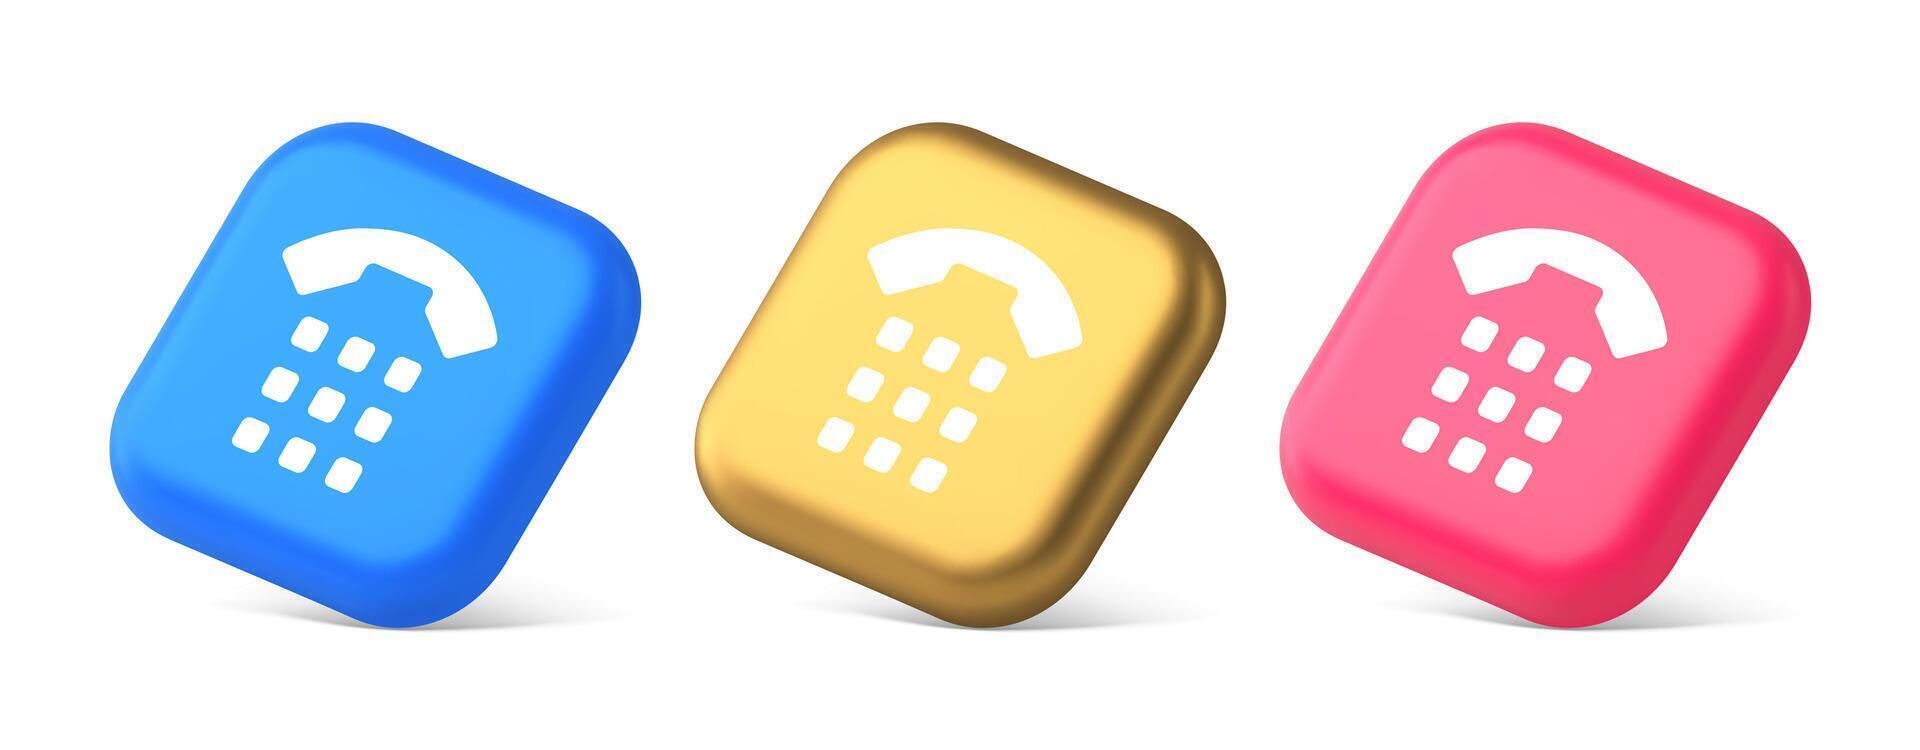 Phone call button application handset mobile contact communication 3d realistic isometric icon vector